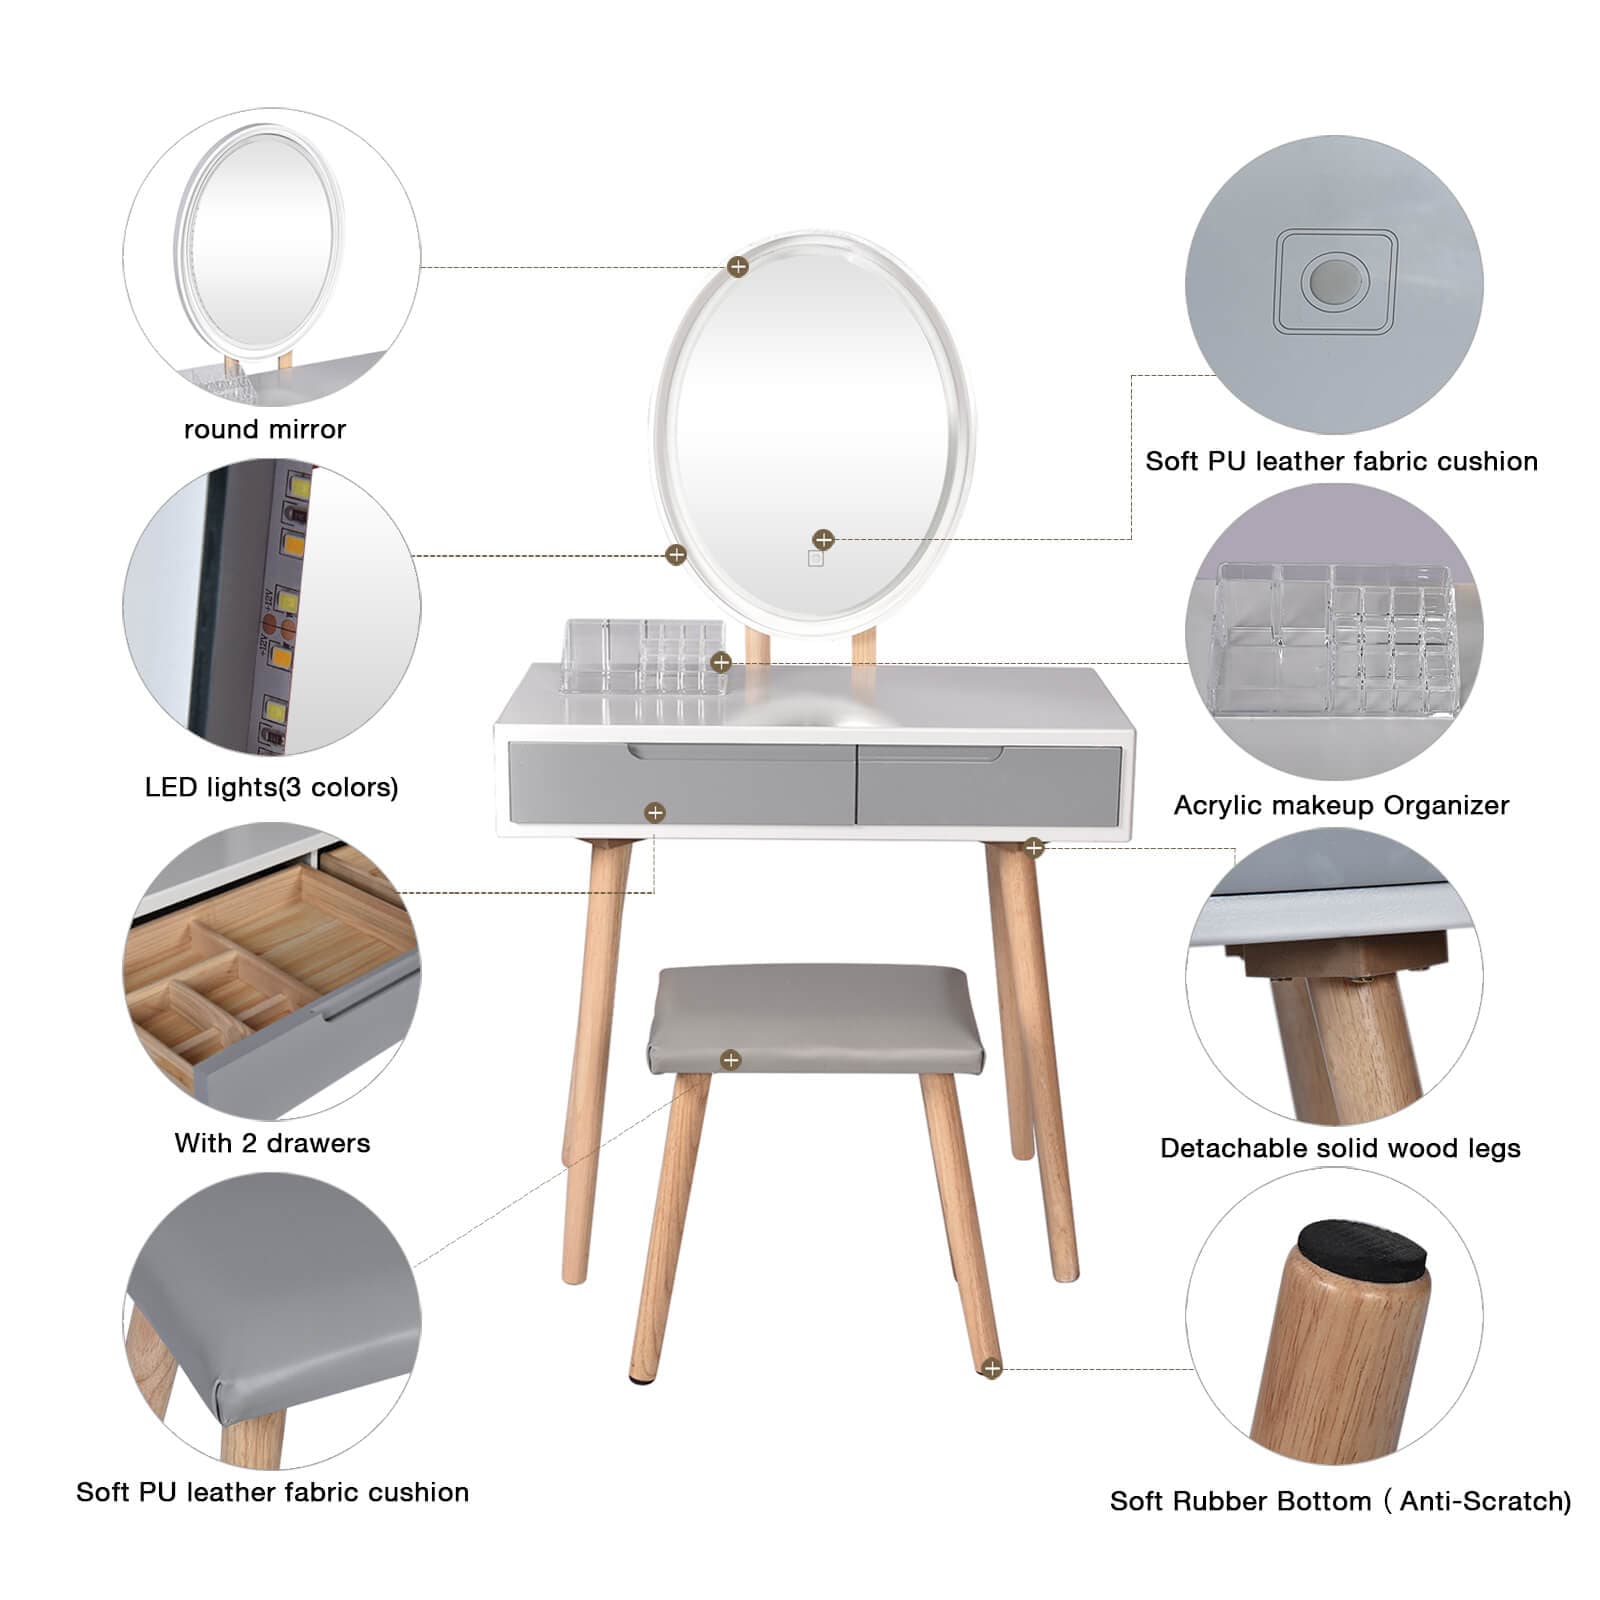 8 features of Elecwish Makeup dressing table 32" Dressing Makeup Vanity Table Stool Set W/ LED Mirror